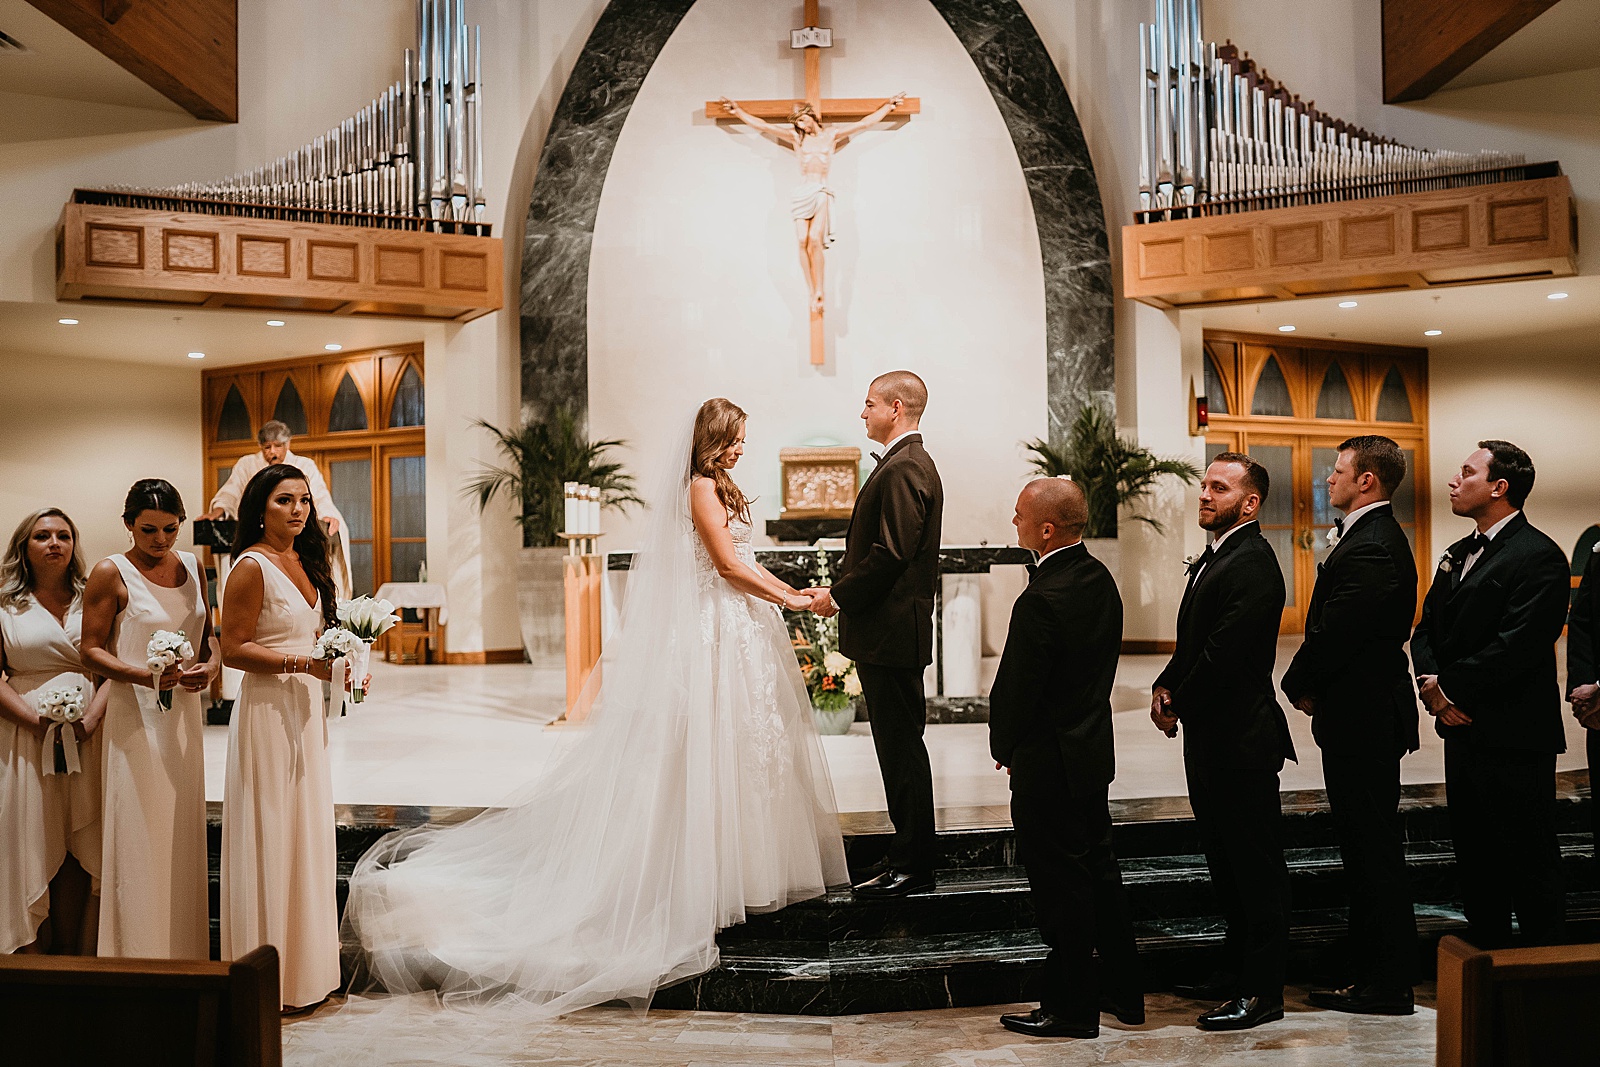 Romantic Church Wedding During COVID-19 captured by West Palm Beach Wedding Photographer, Krystal Capone Photography